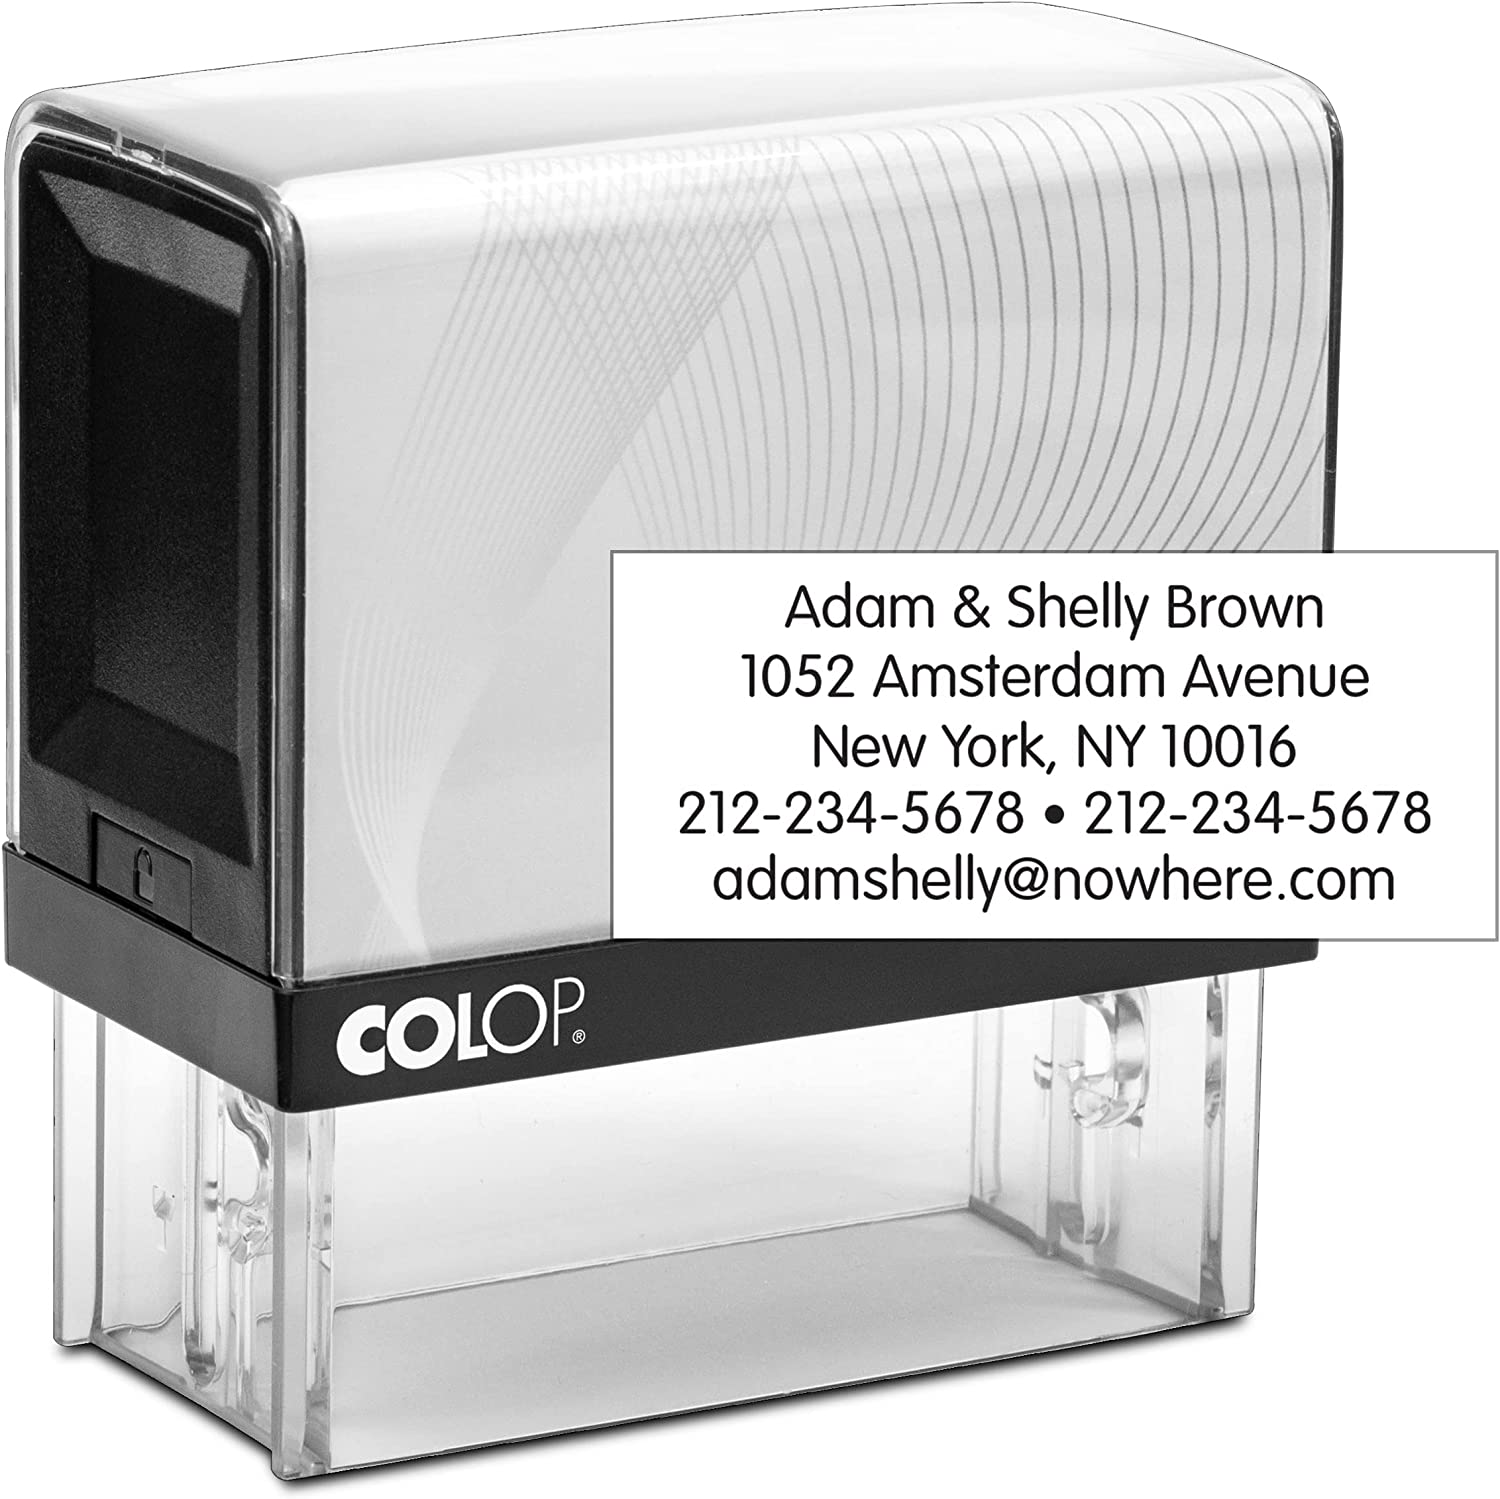 Rubber Stamp Creation Personalizable Self-Inking Stamp